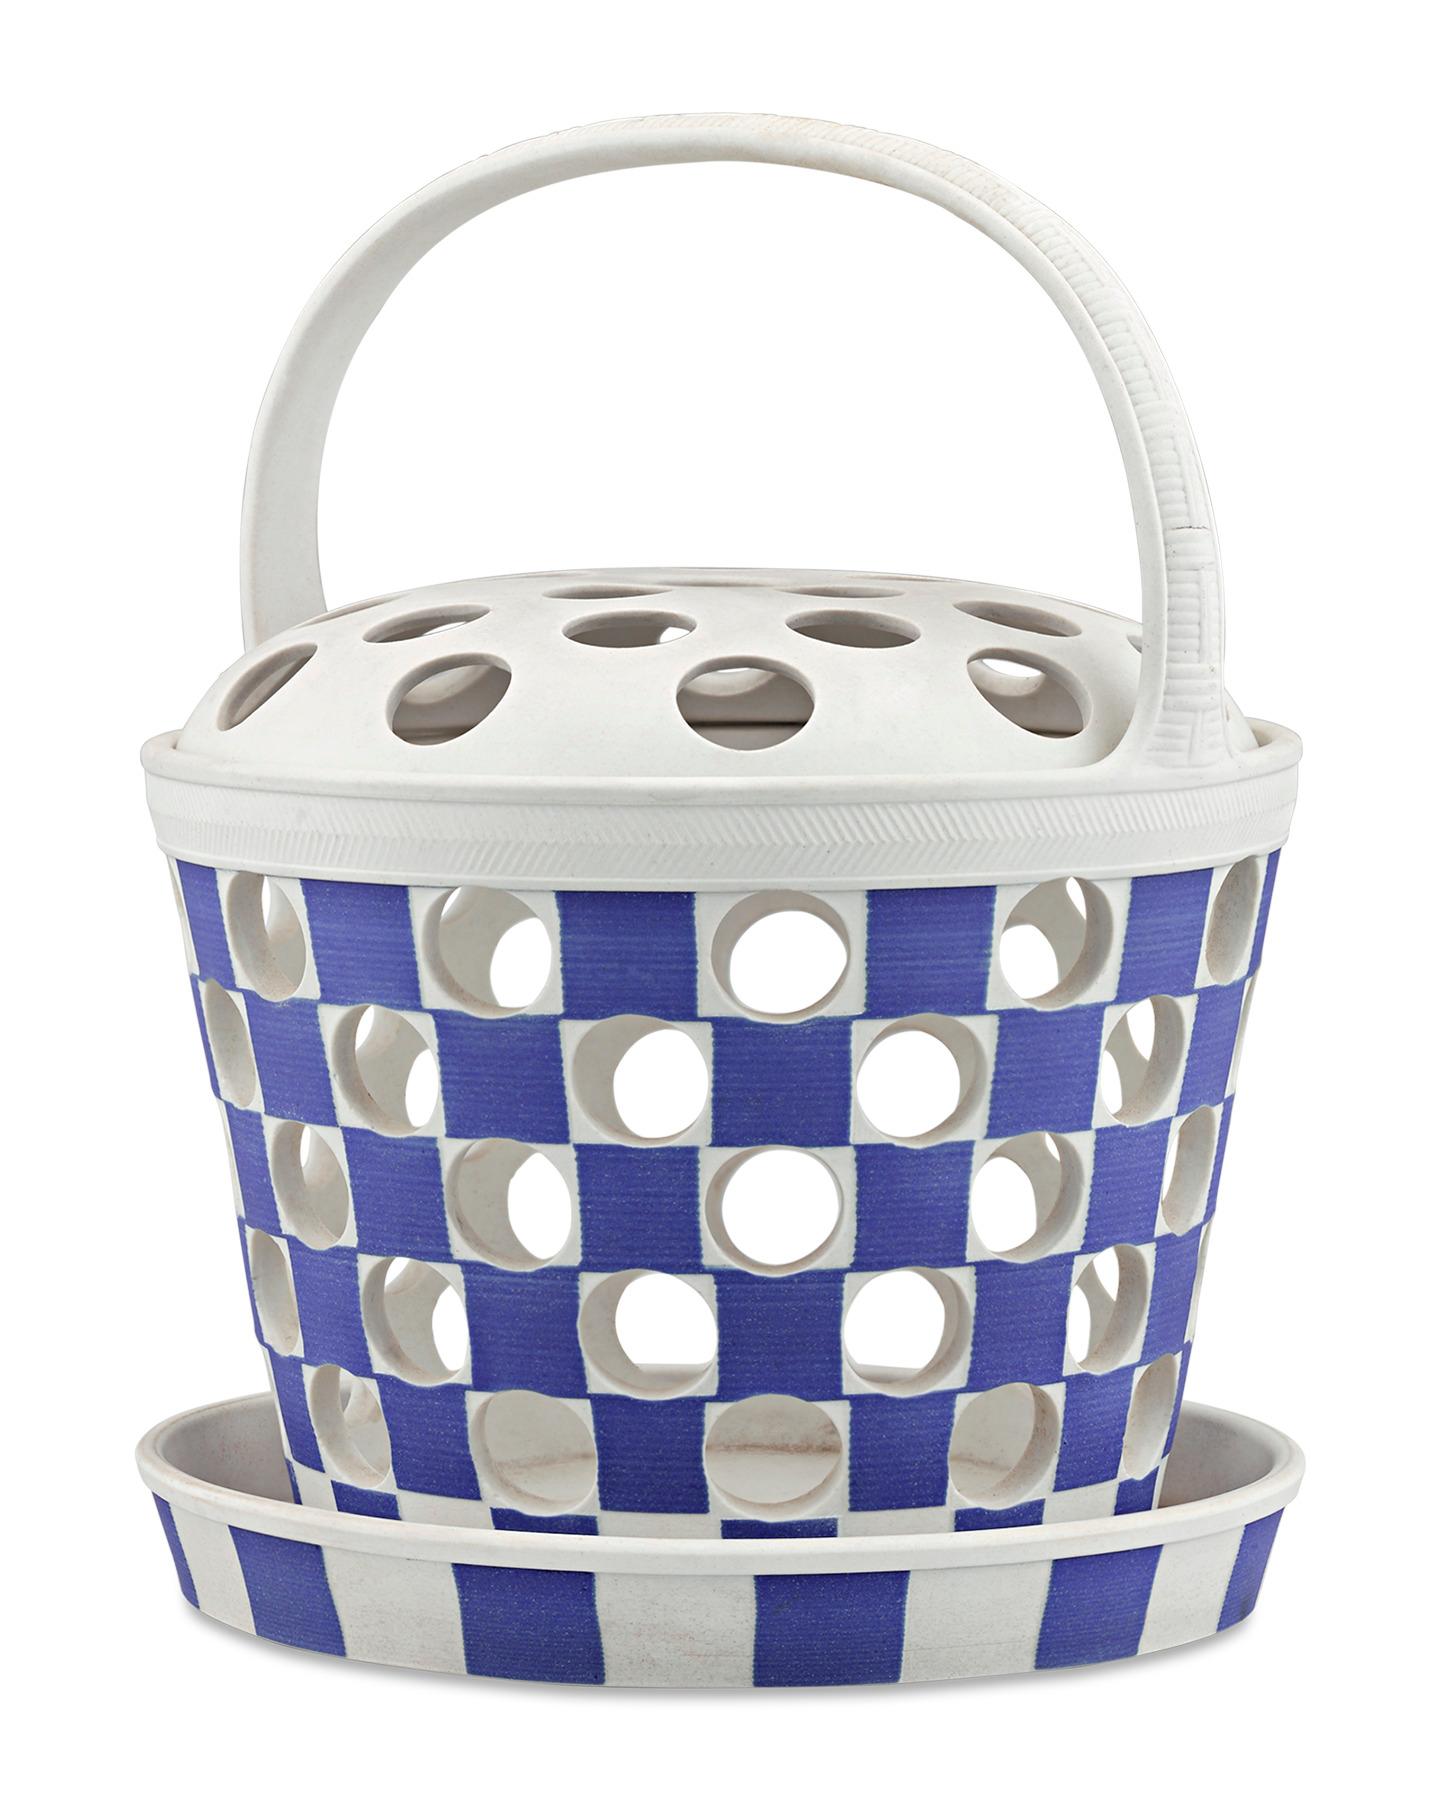 One of Wedgwood’s most acclaimed “useful wares,” this fine jasper-dip pierced orange basket displays a brilliant cobalt blue and white checkerboard pattern in the firm’s classic “biscuit” finish. The bowl and lid’s striking “pierced” latticework